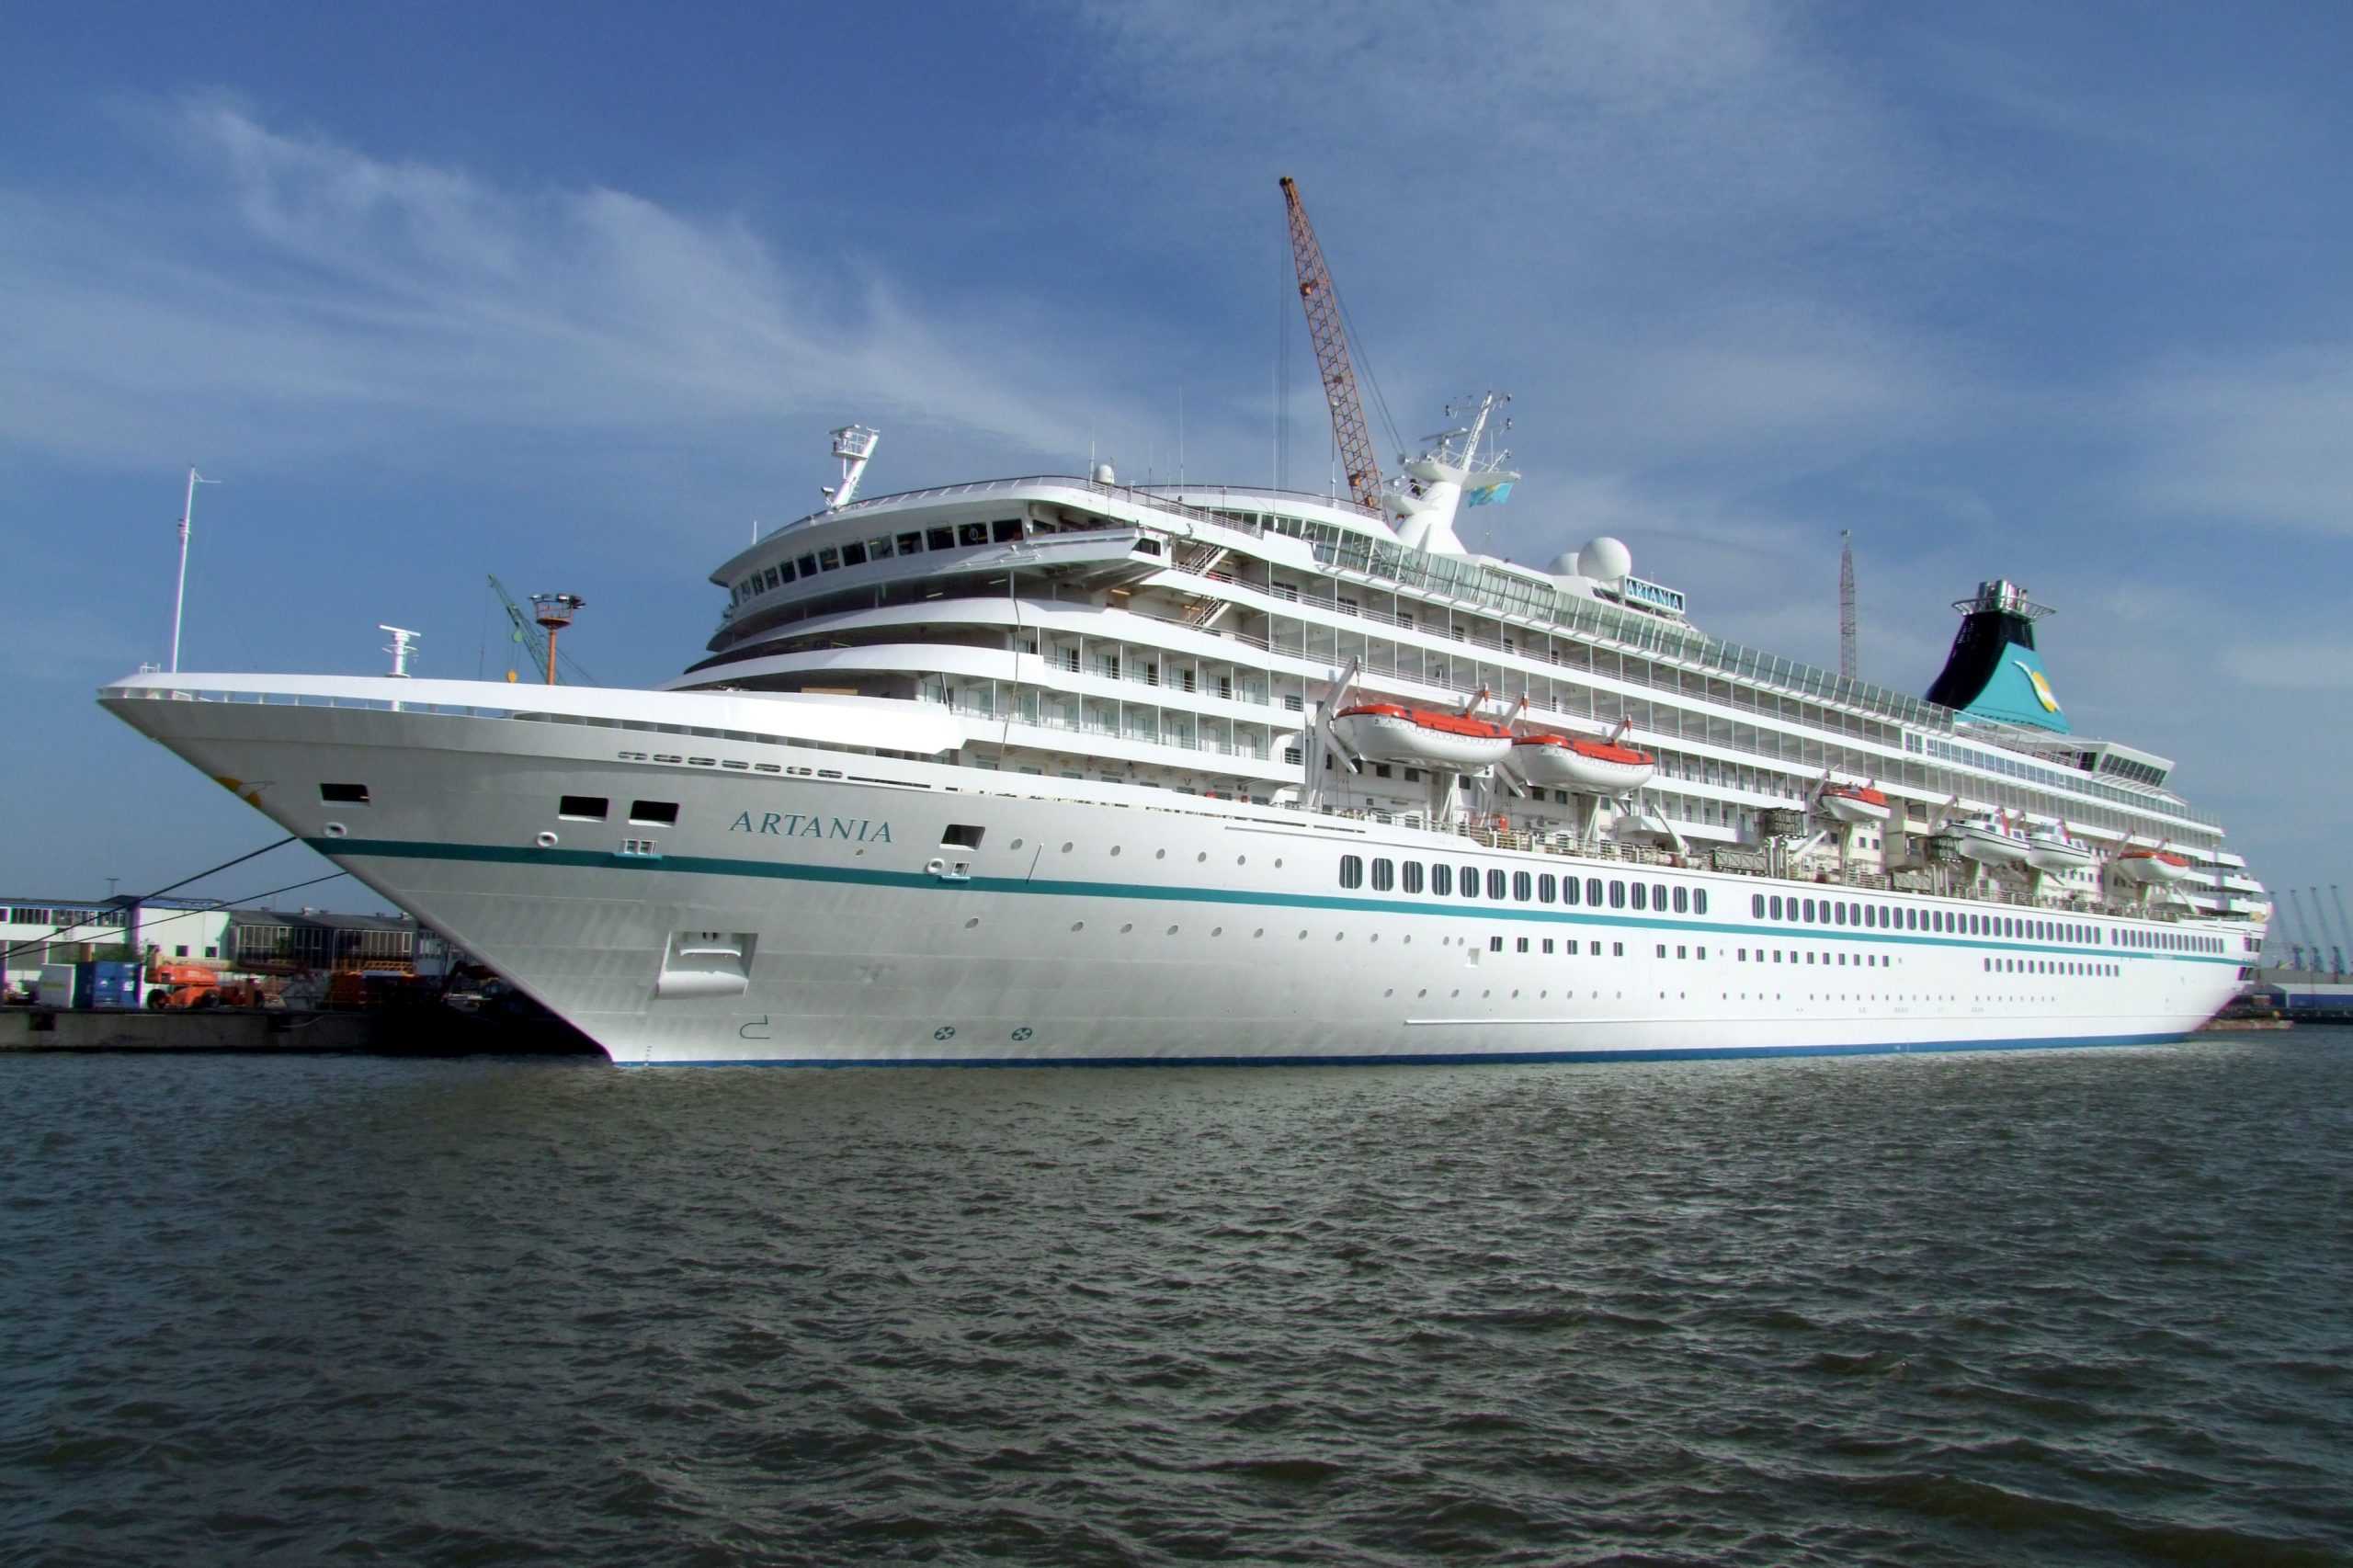 Cruise ship Artania arrives in Qatar with over 1,000 tourists